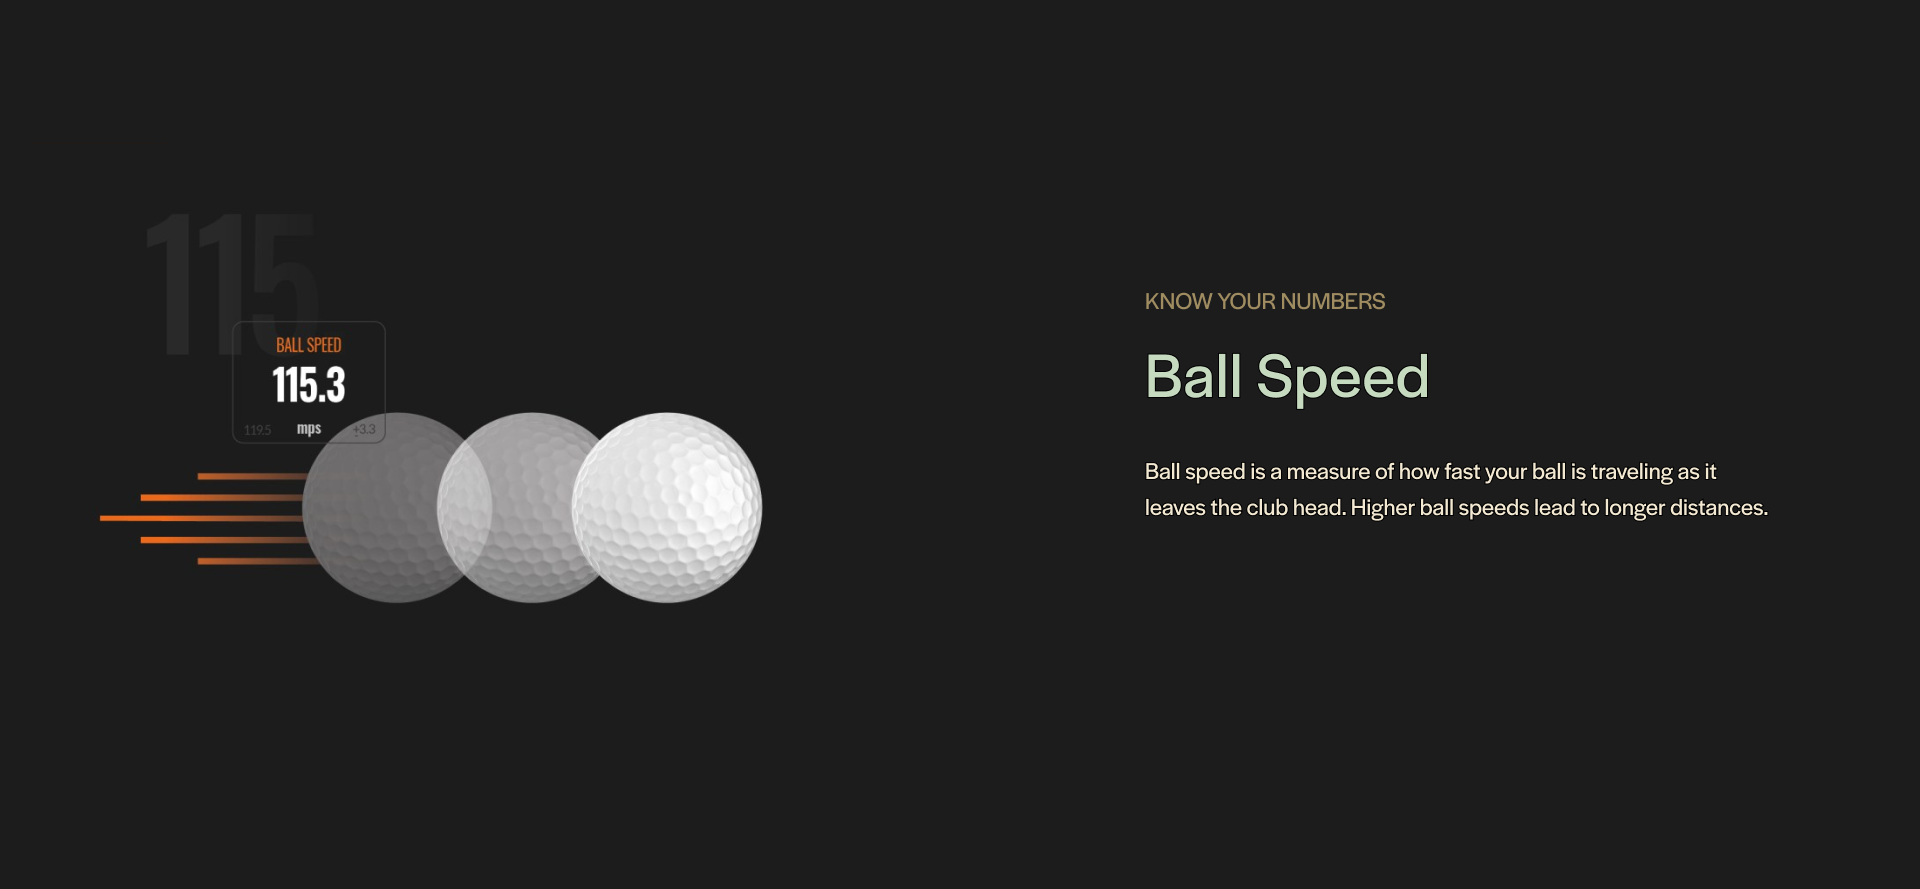 Ball speed is a measure of how fast your ball is traveling as it leaves the club head. Higher ball speeds lead to longer distances.